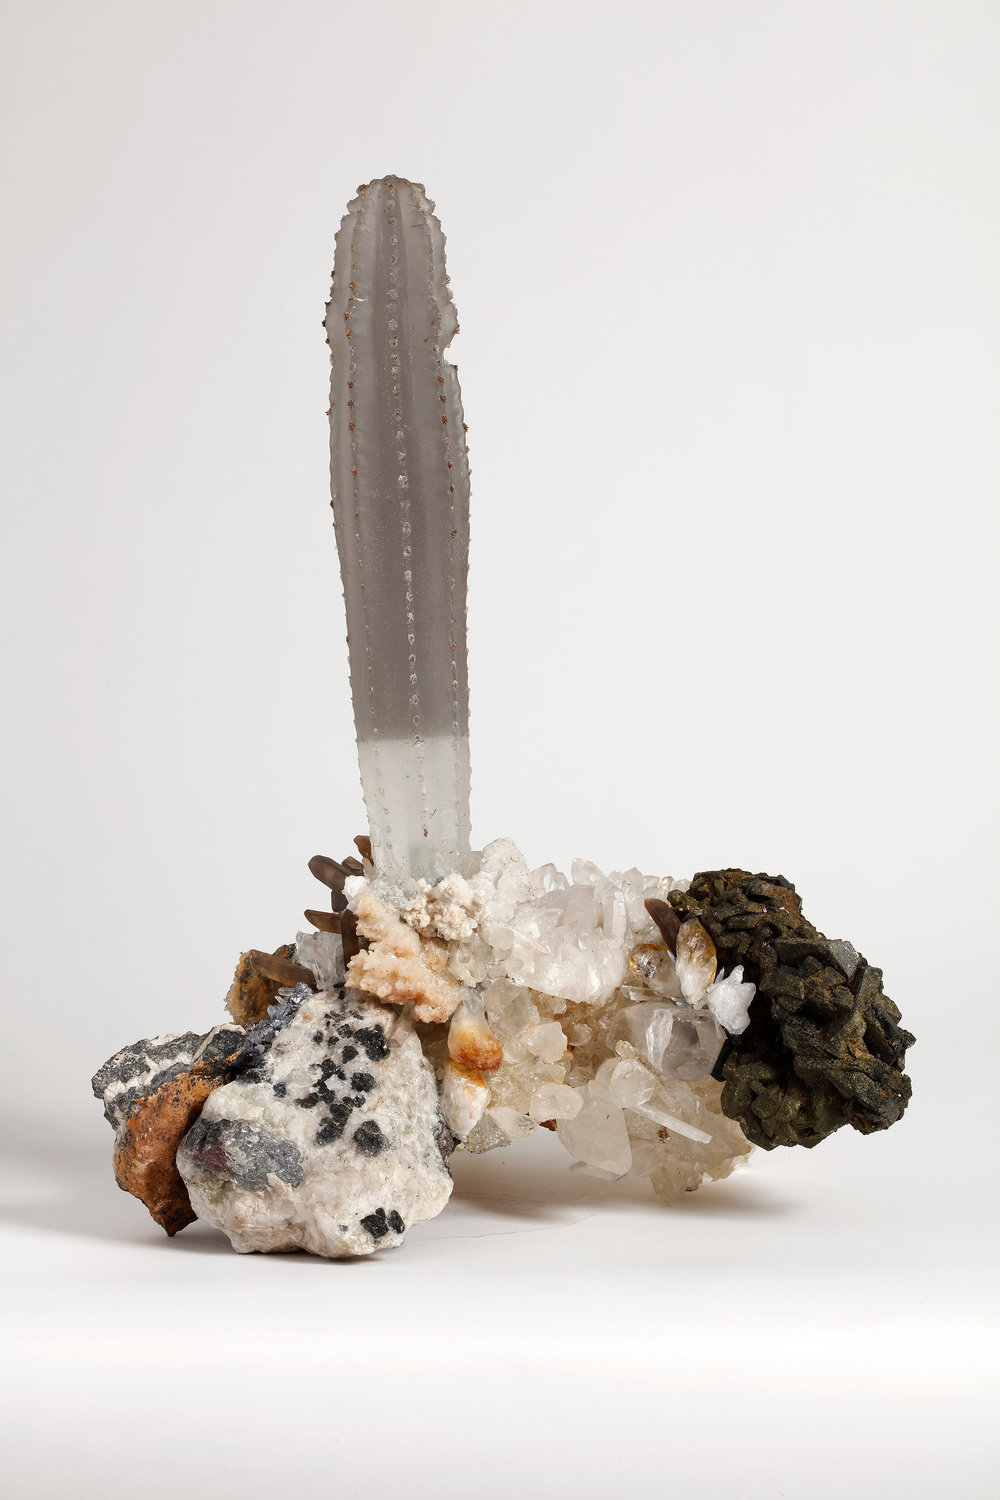 Freeman and lowe, four drops of daylight (view 2), 2019, cast resin, minerals, 15 3 4 x 12 1 4 x 9 7 8 in., 40 x 31 x 25 cm, 370498